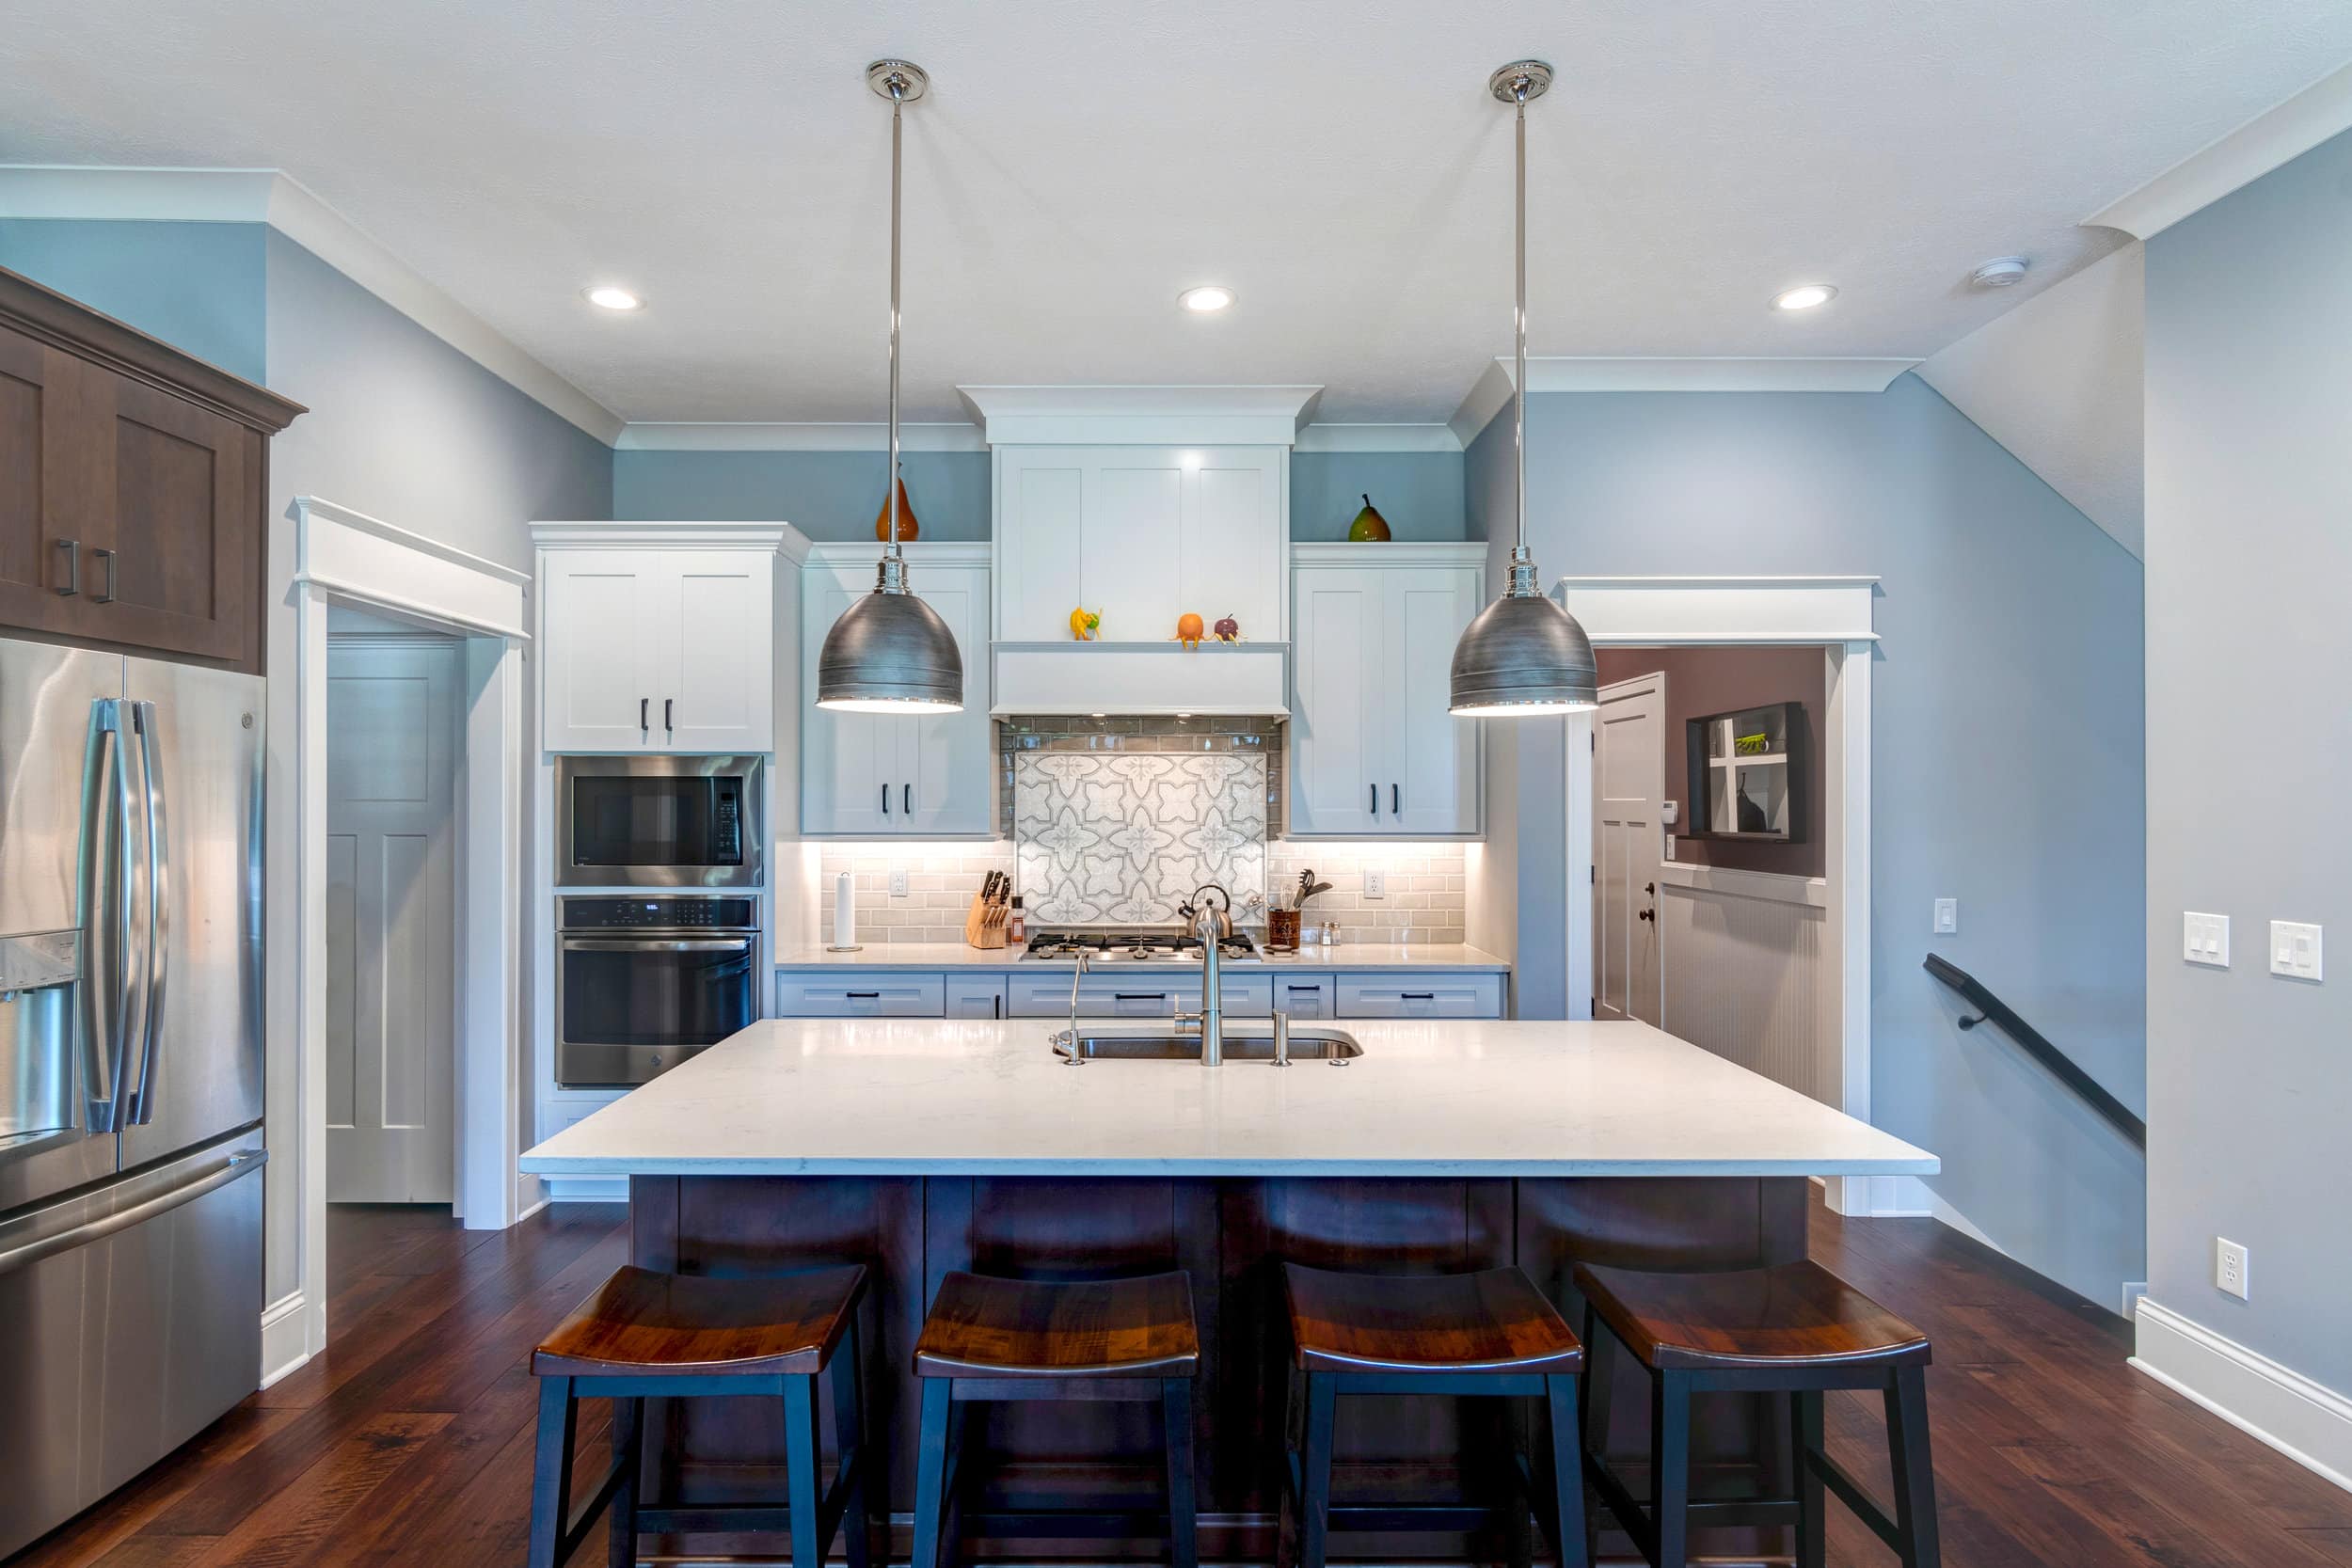 A kitchen with blue walls and stainless steel appliances, designed and built by a trusted Custom Home Builder Carmel Indiana.